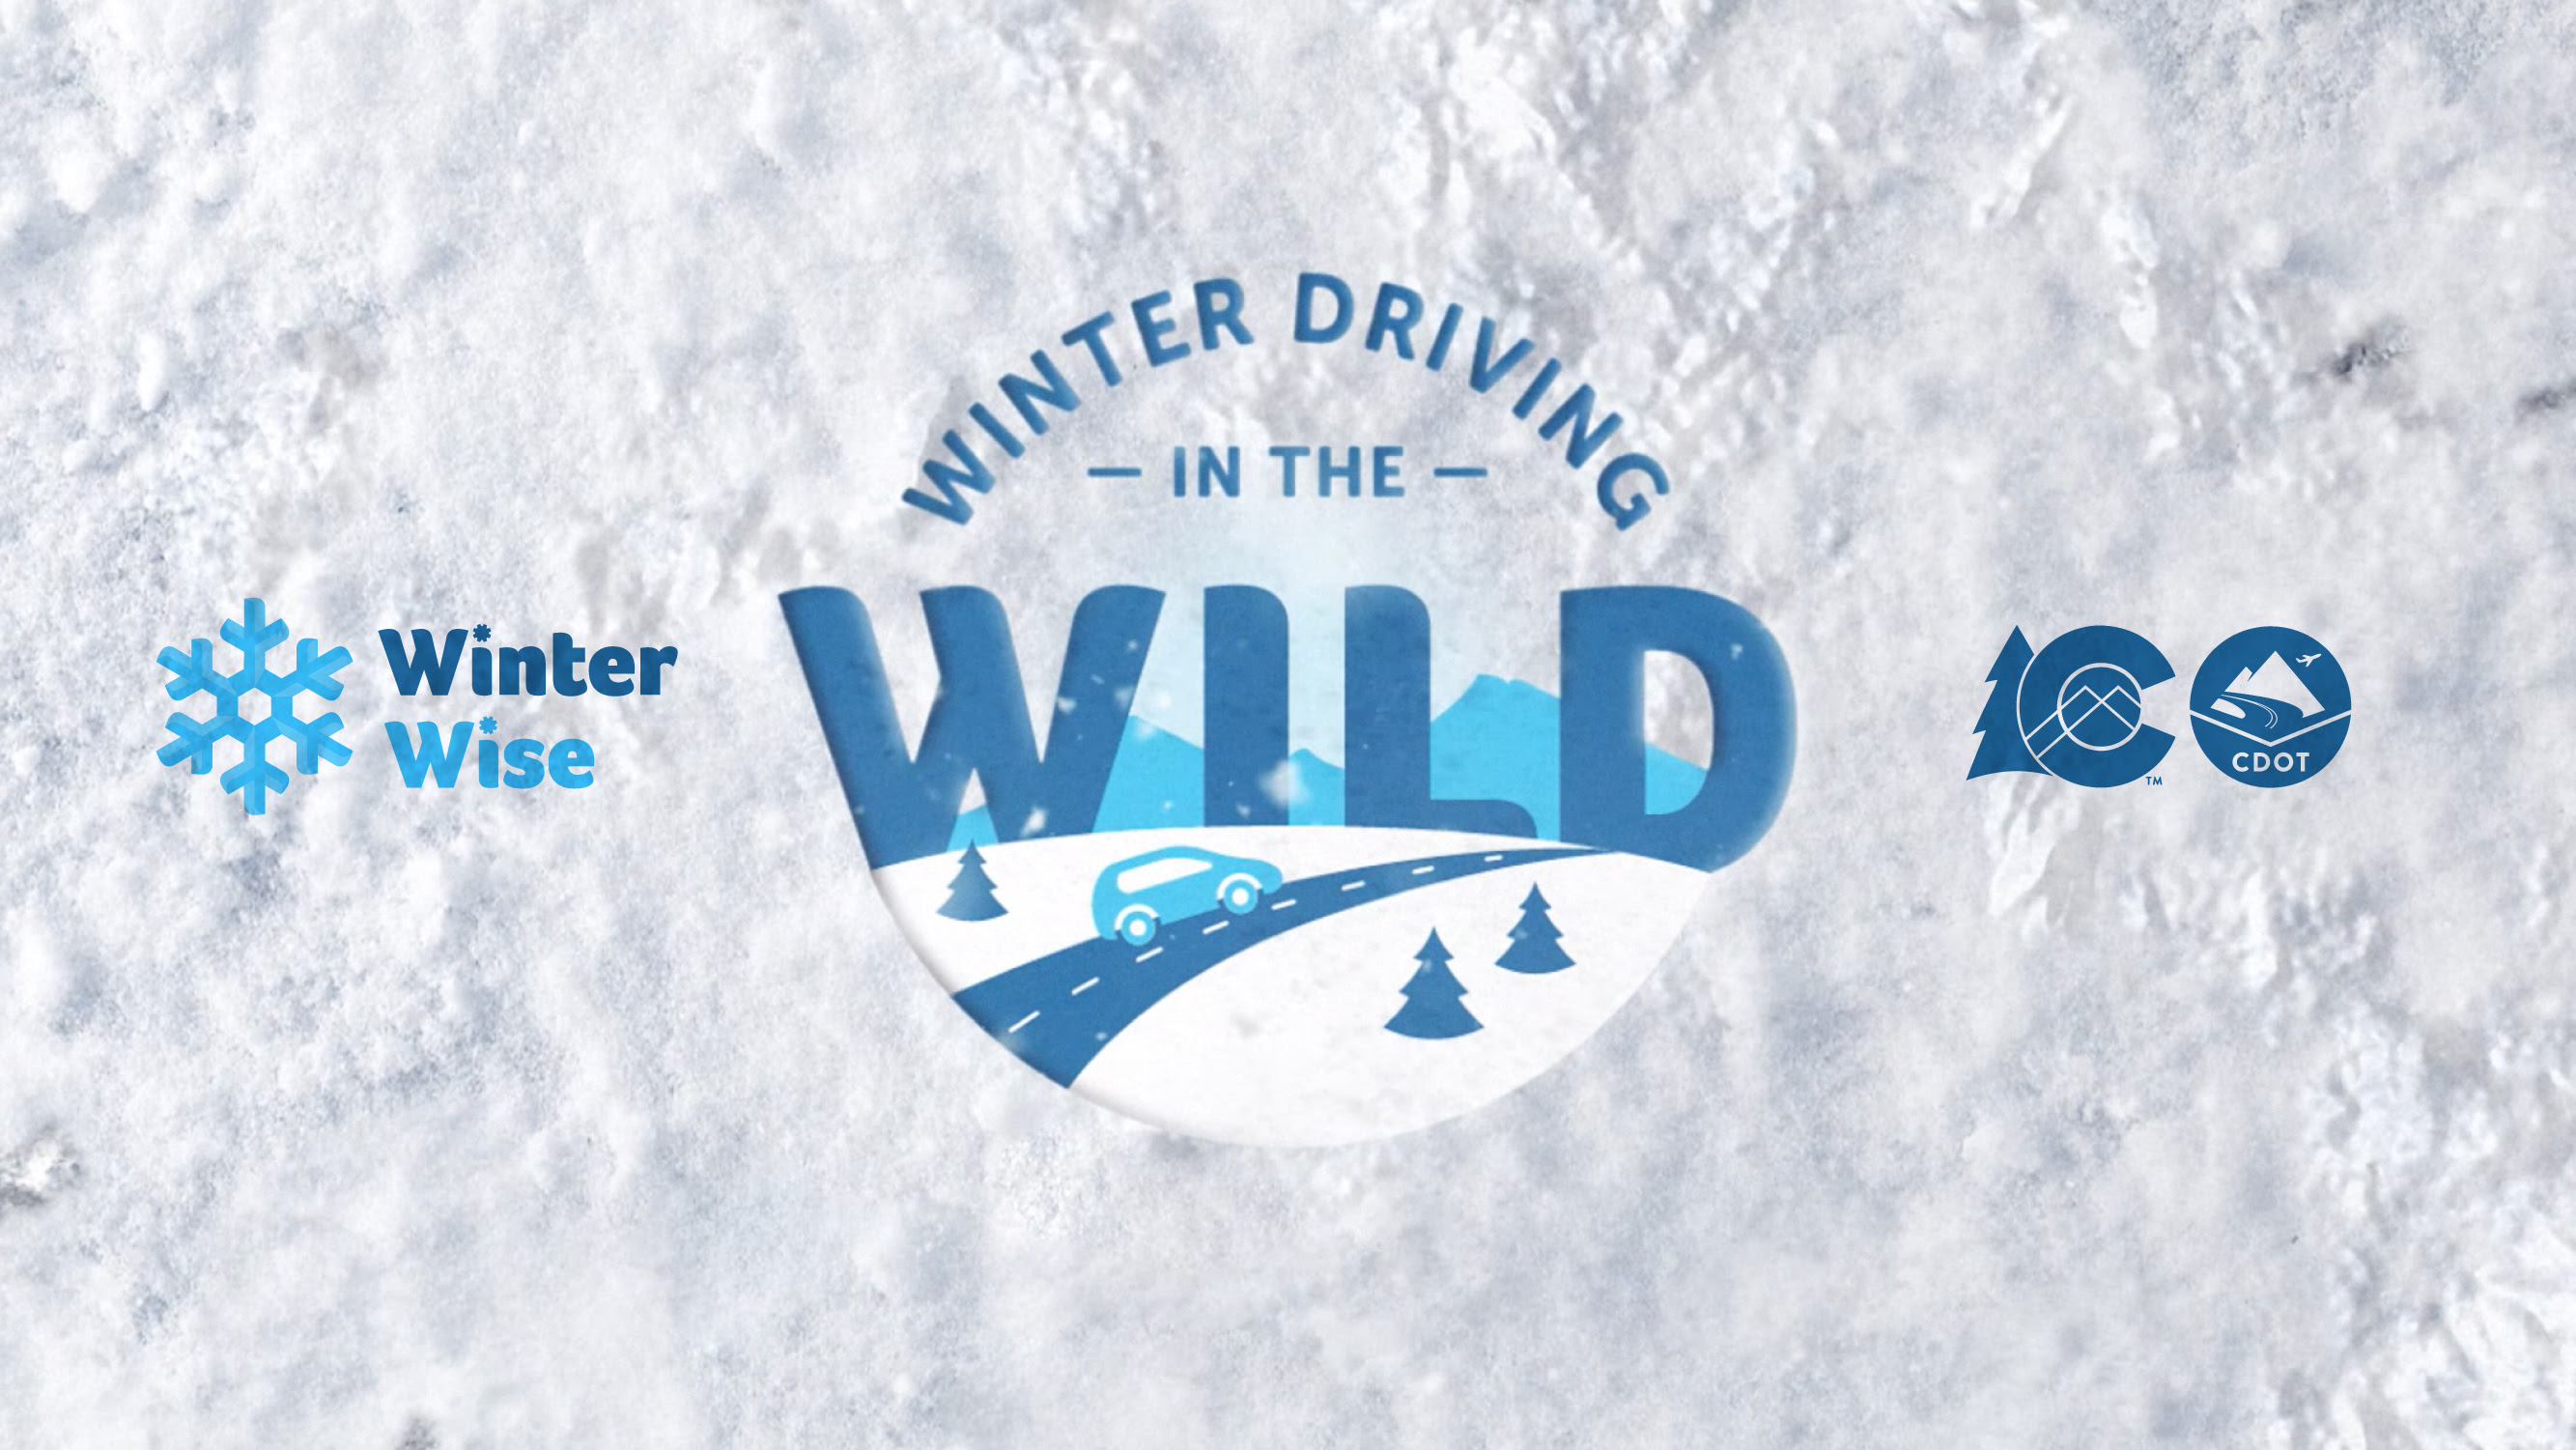 Winter Wise - Winter driving in the wild graphic detail image